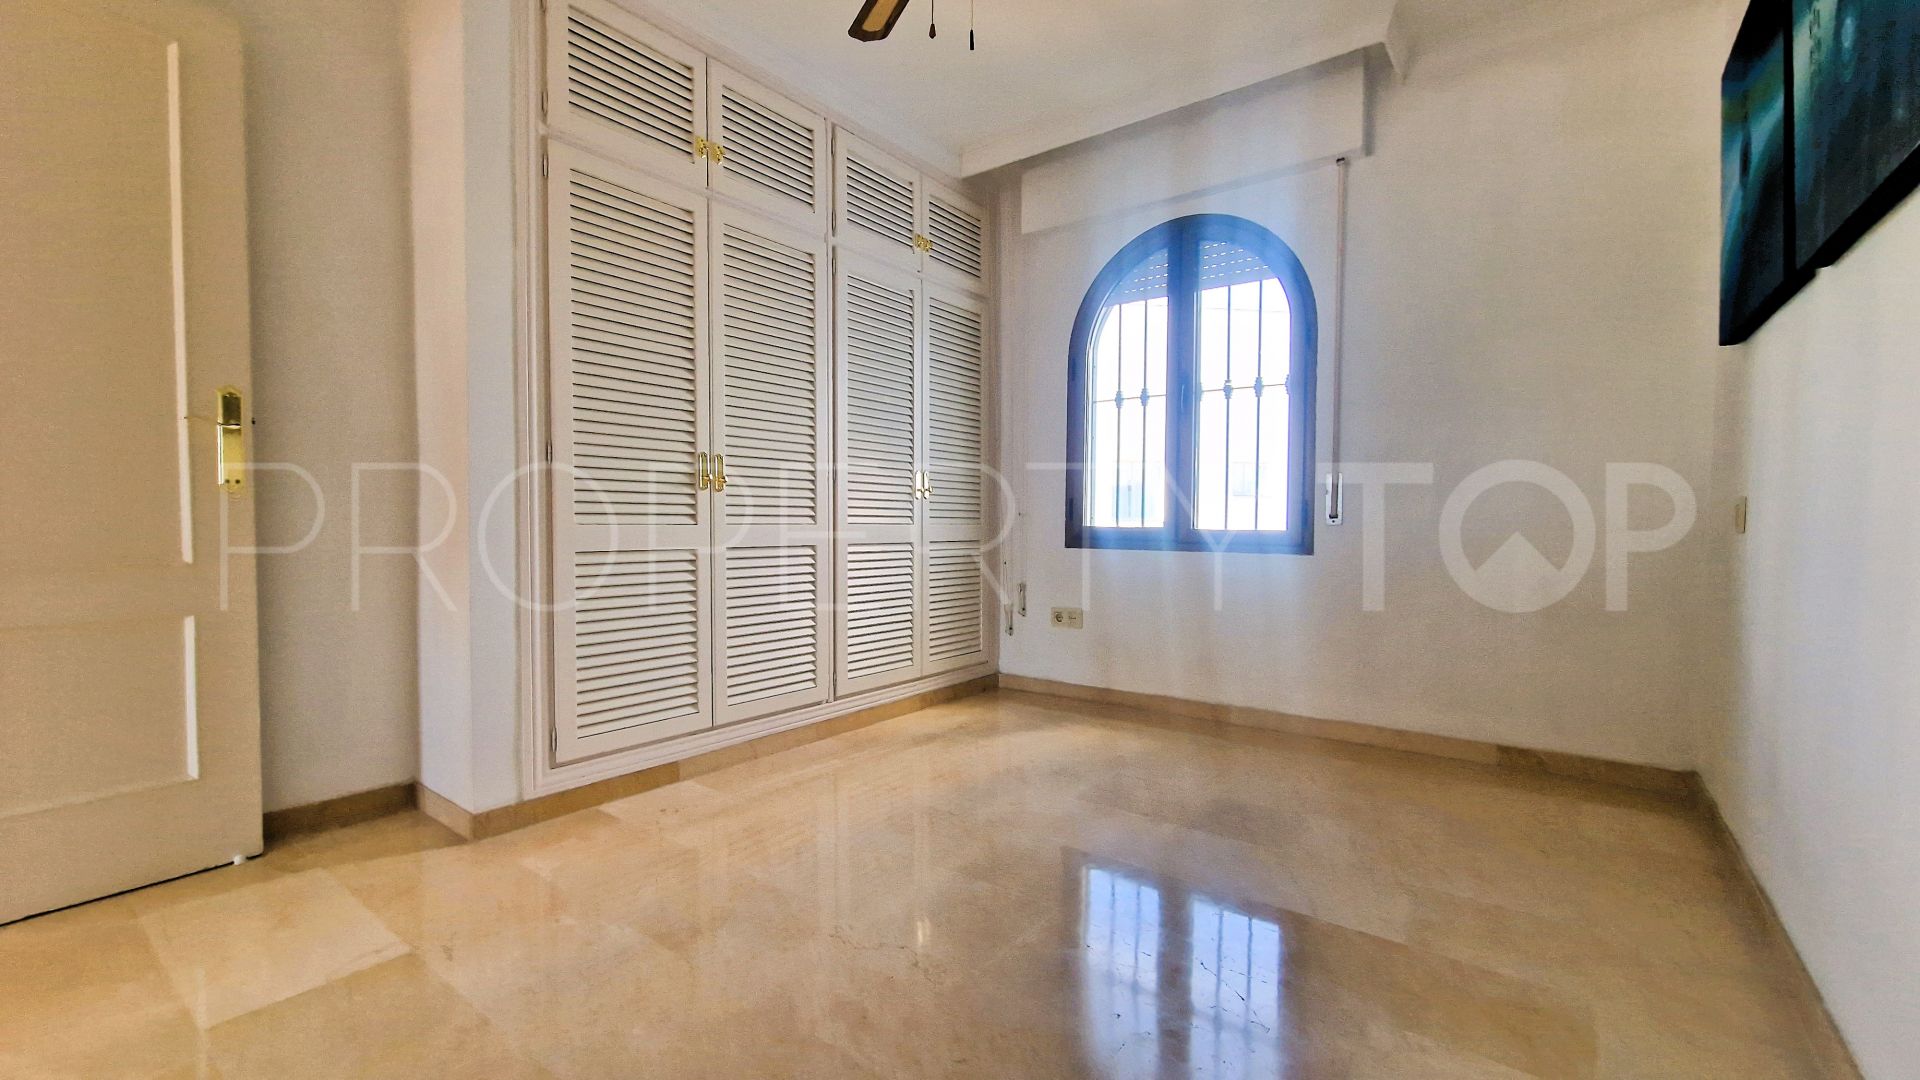 For sale town house in Bel Air with 4 bedrooms